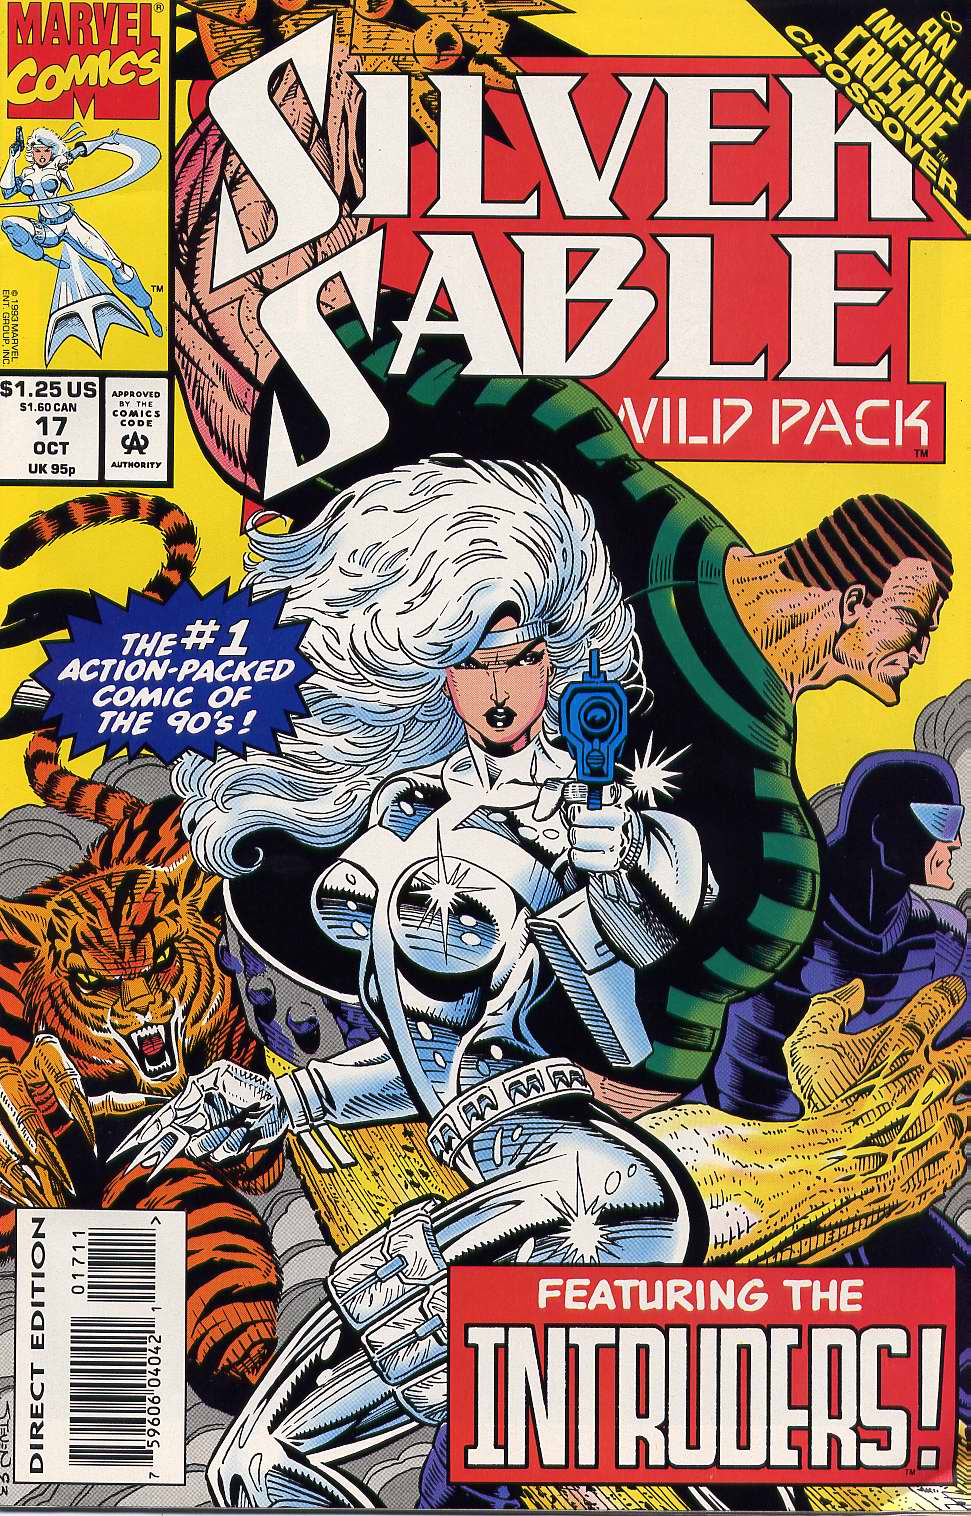 Read online Silver Sable and the Wild Pack comic -  Issue #17 - 1